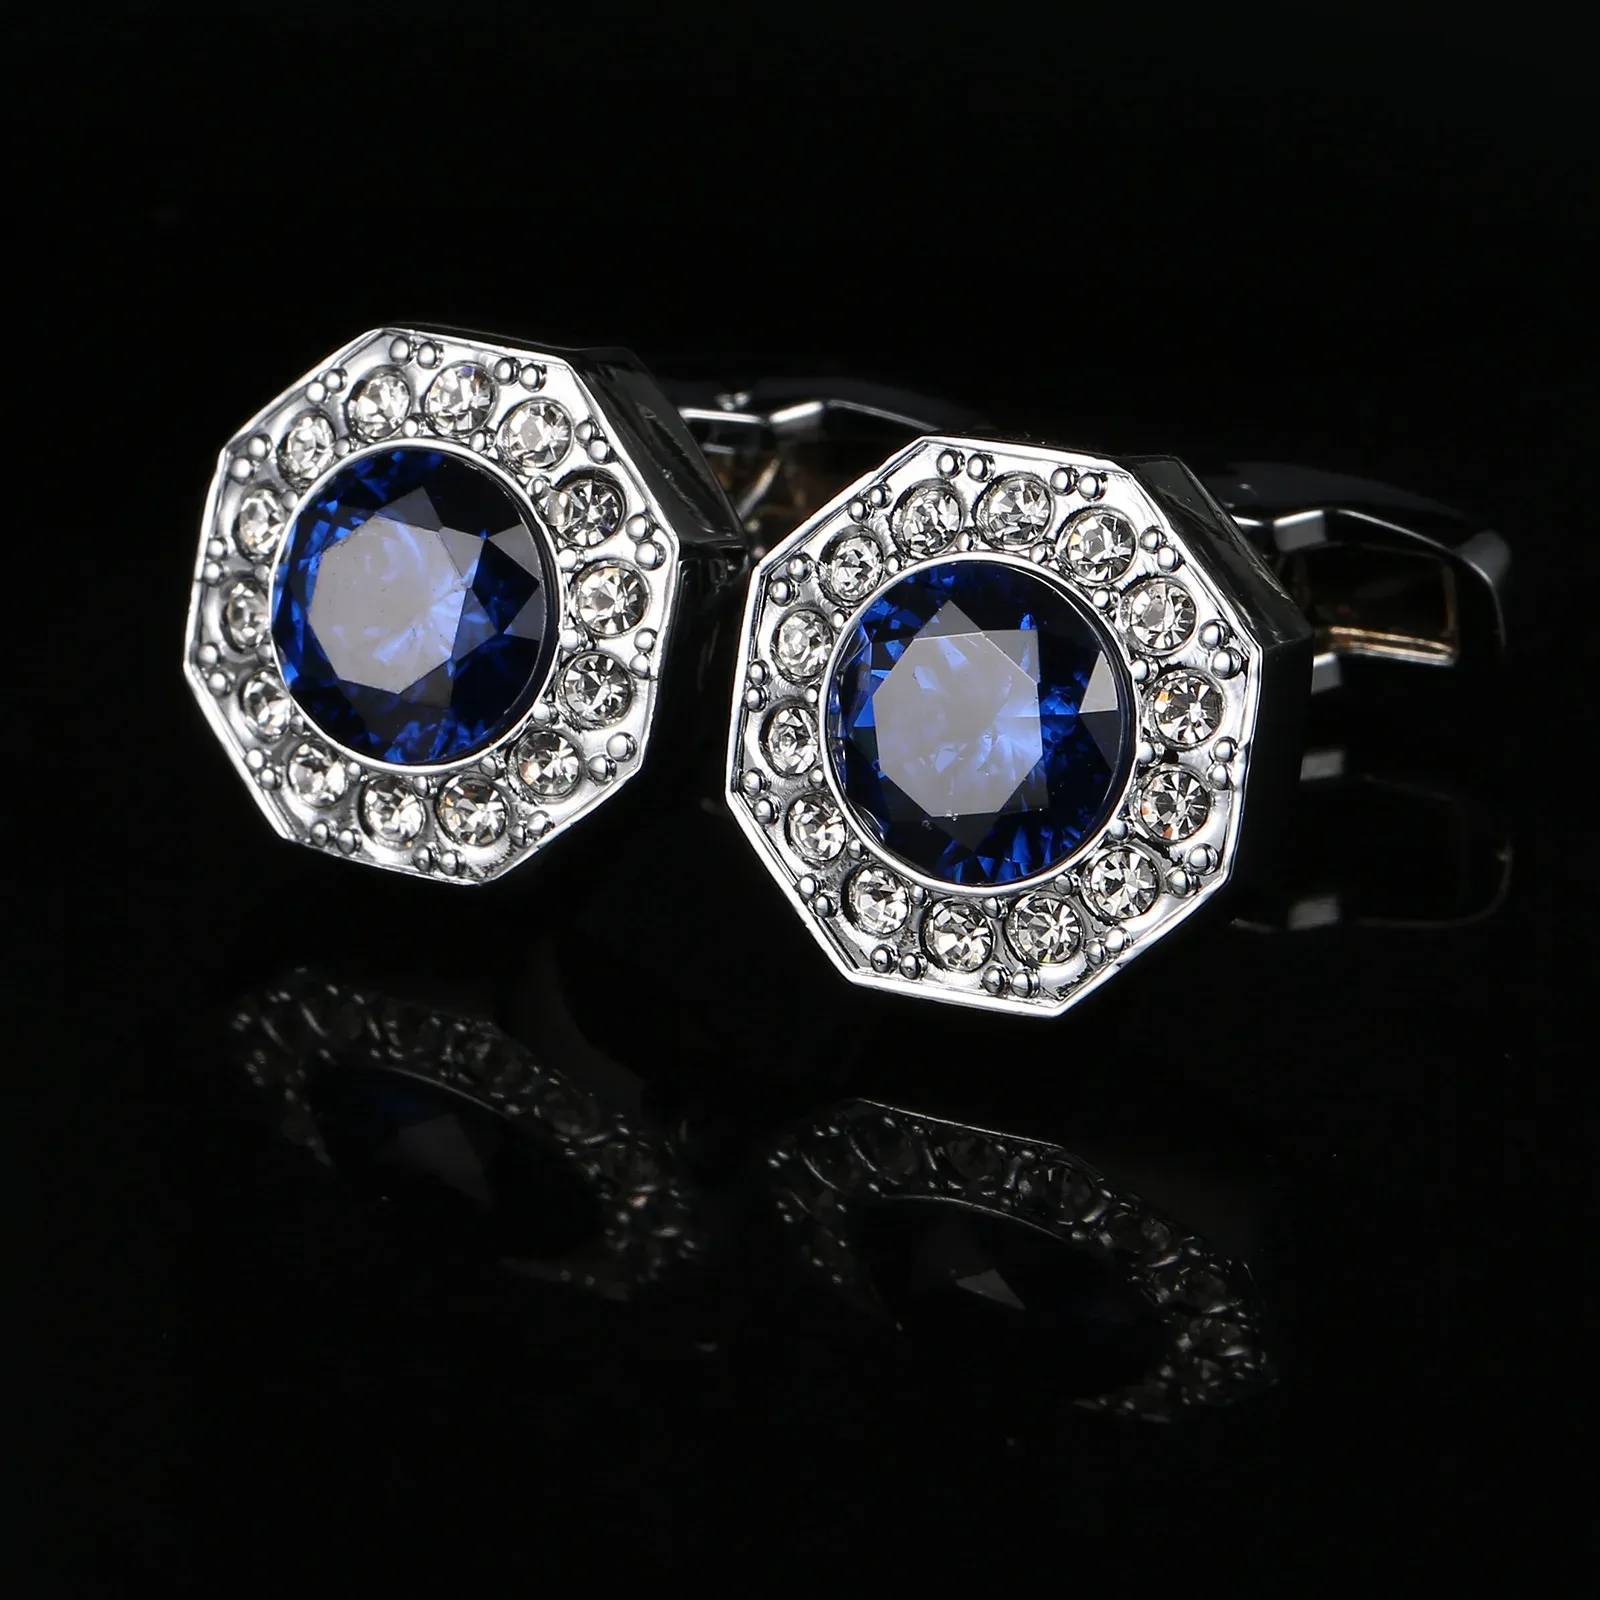 Links High Quality Blue Crystal French Shirt Cufflinks For Father Gifts Men's Rhinestones Buttons Wedding Groomsmen Farors Jewelry